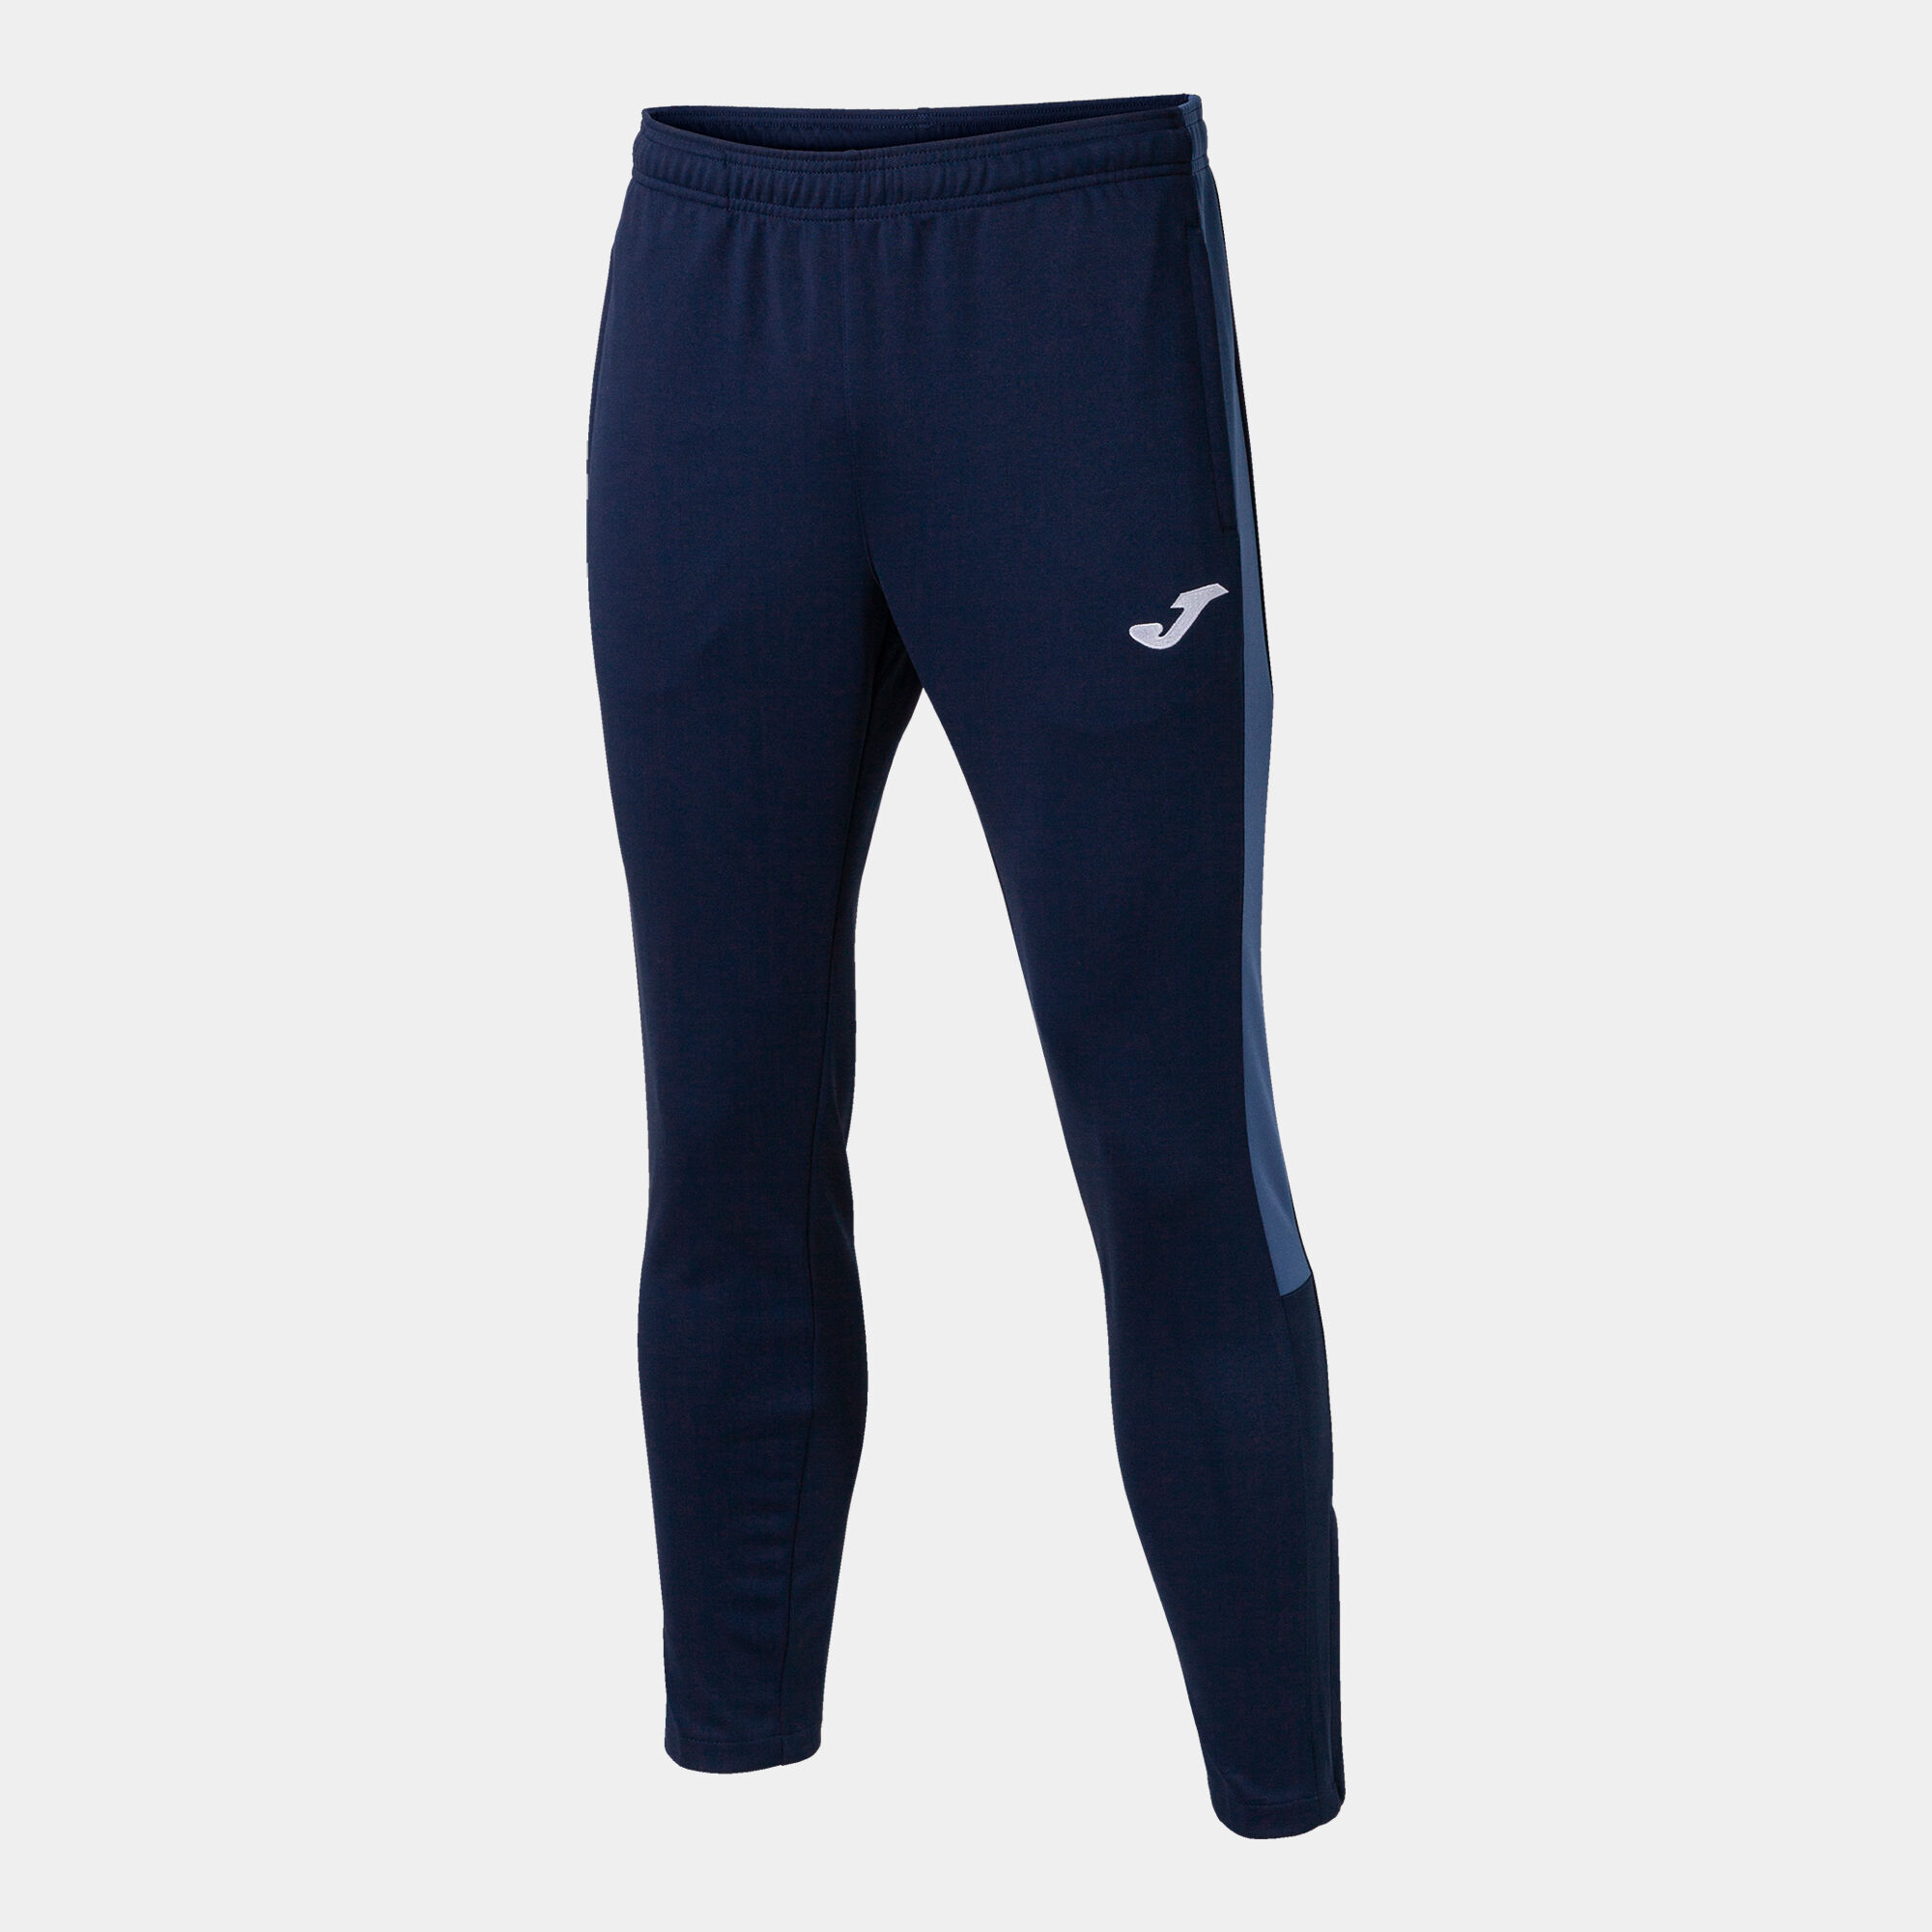 Joma Childrens 9016p13.35 Trousers 